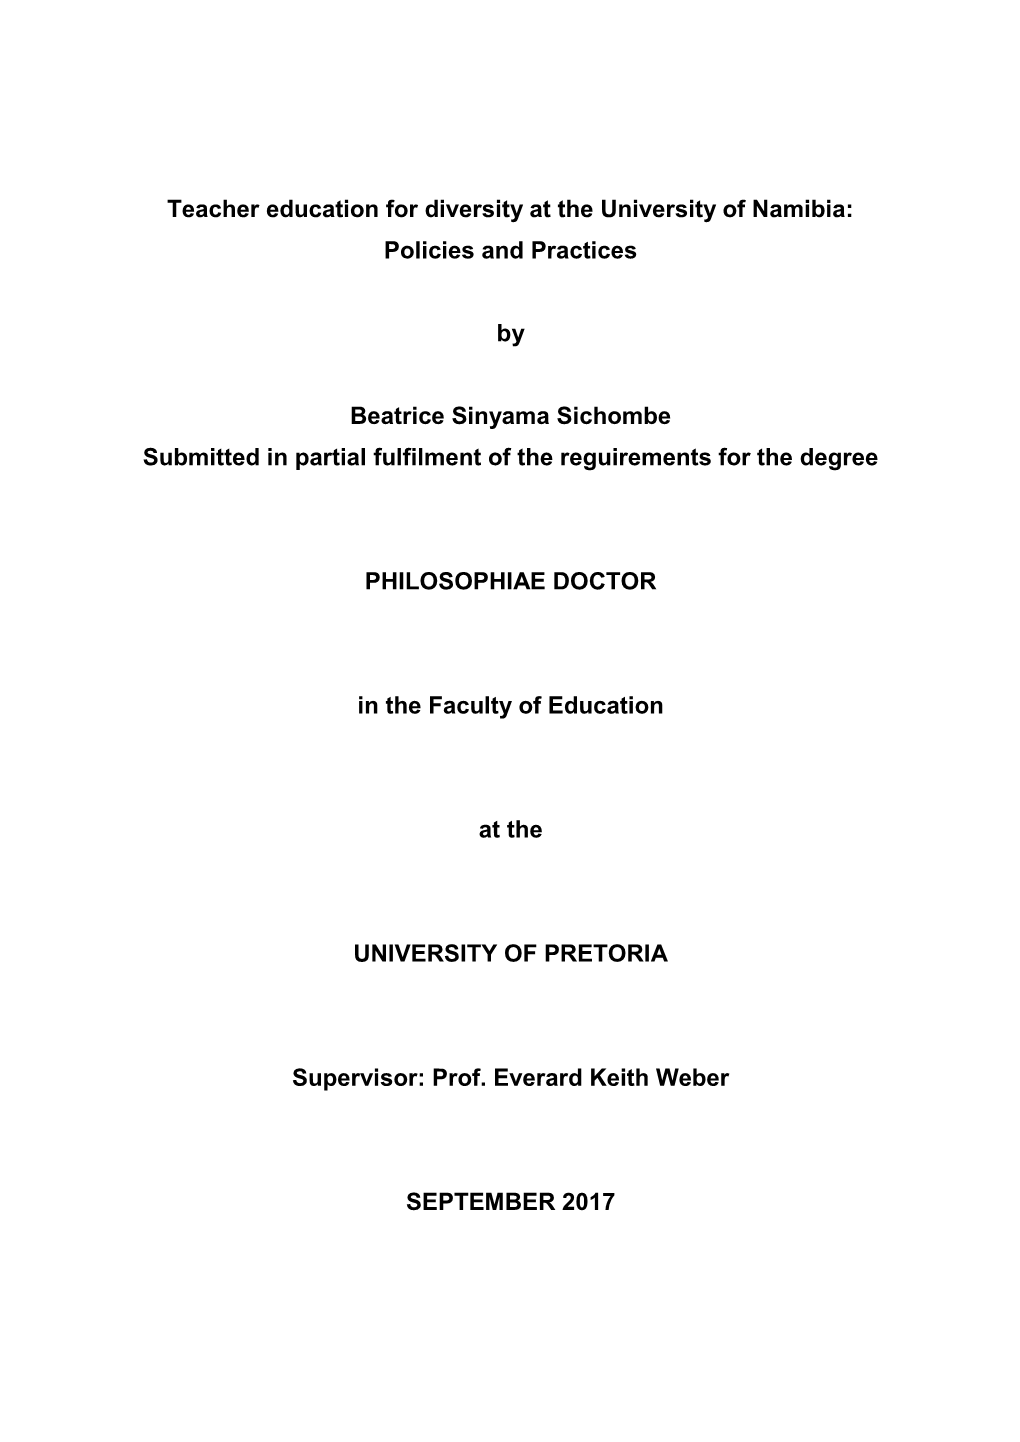 Teacher Education for Diversity at the University of Namibia: Policies and Practices